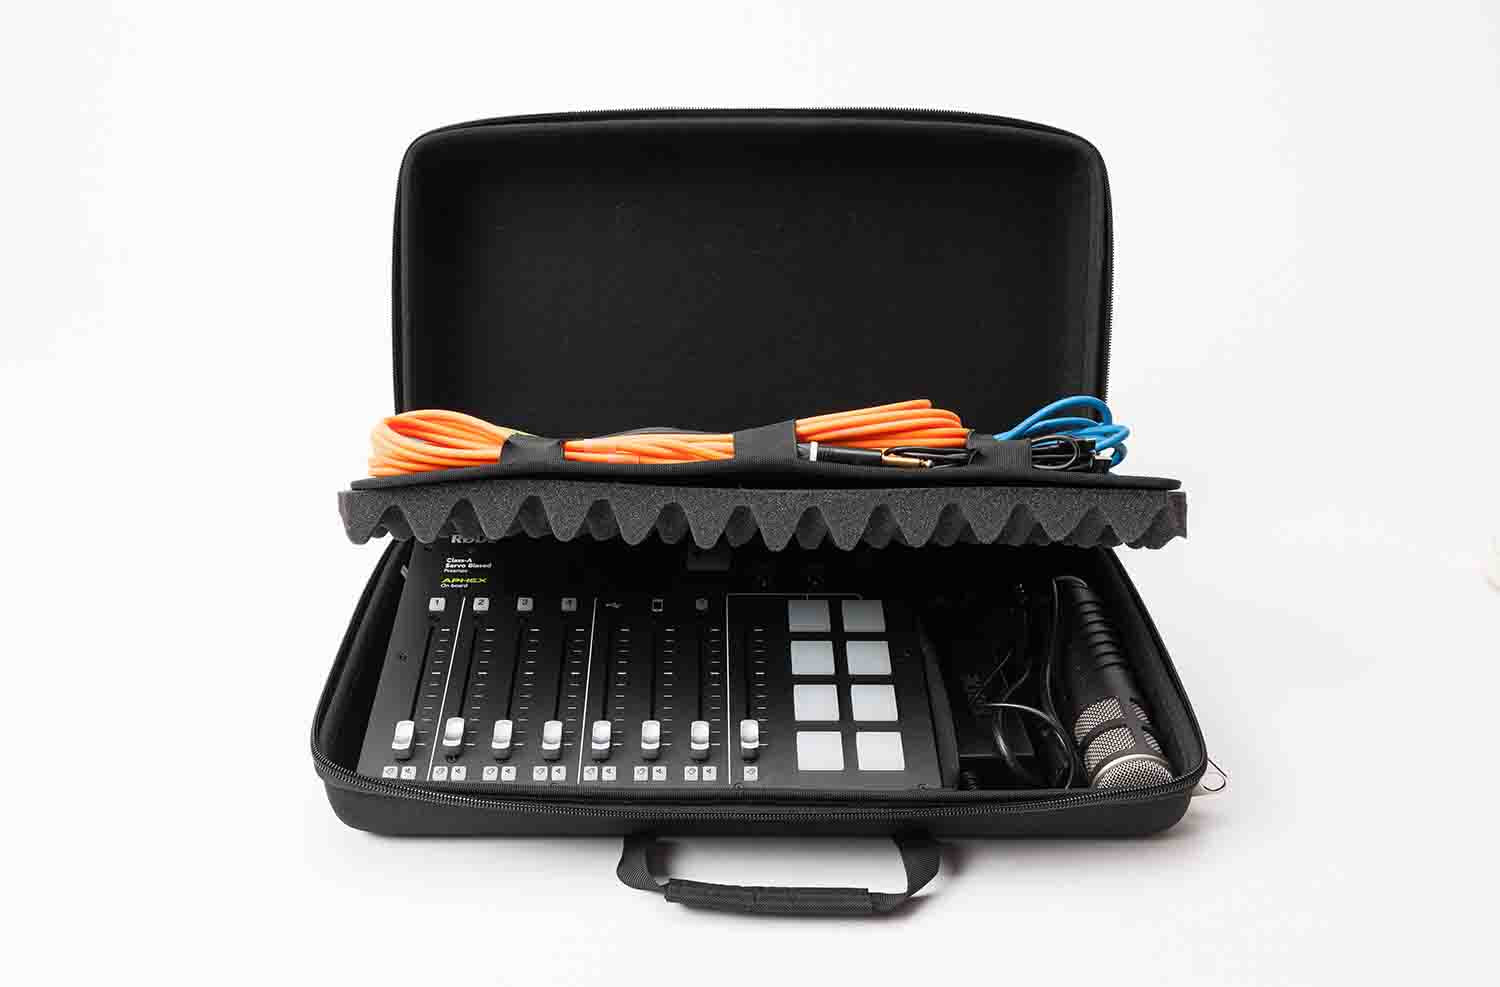 B-Stock: Magma MGA48033 DJ Controller Case for Rodecaster Pro - Hollywood DJ